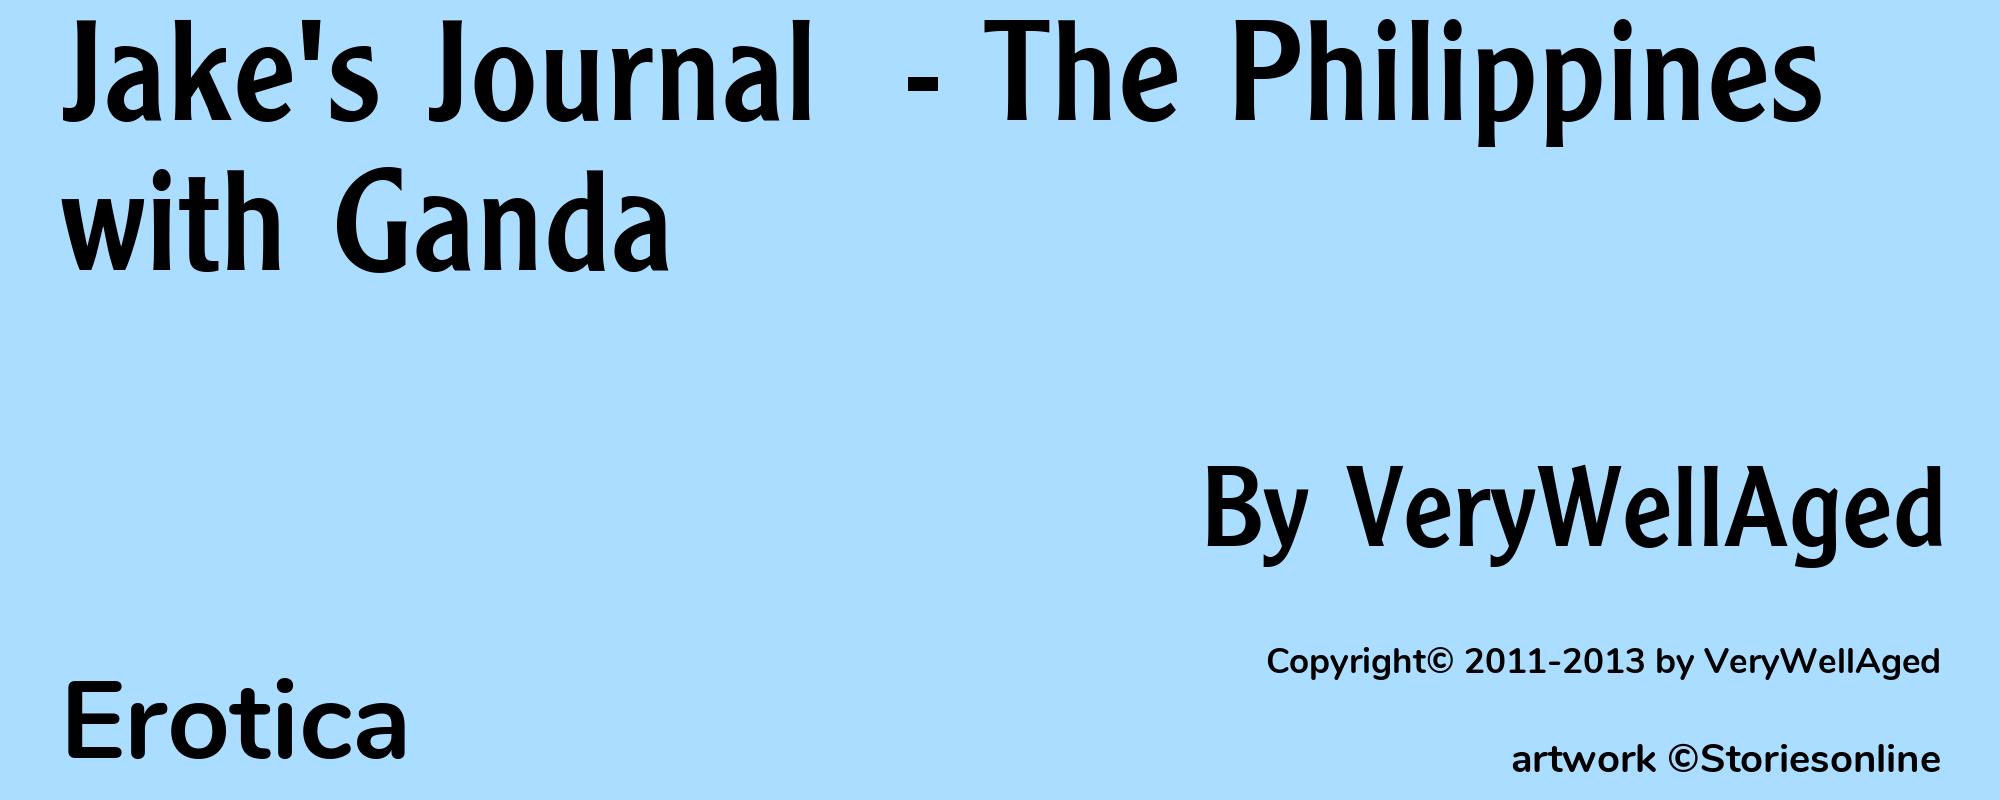 Jake's Journal  - The Philippines with Ganda - Cover